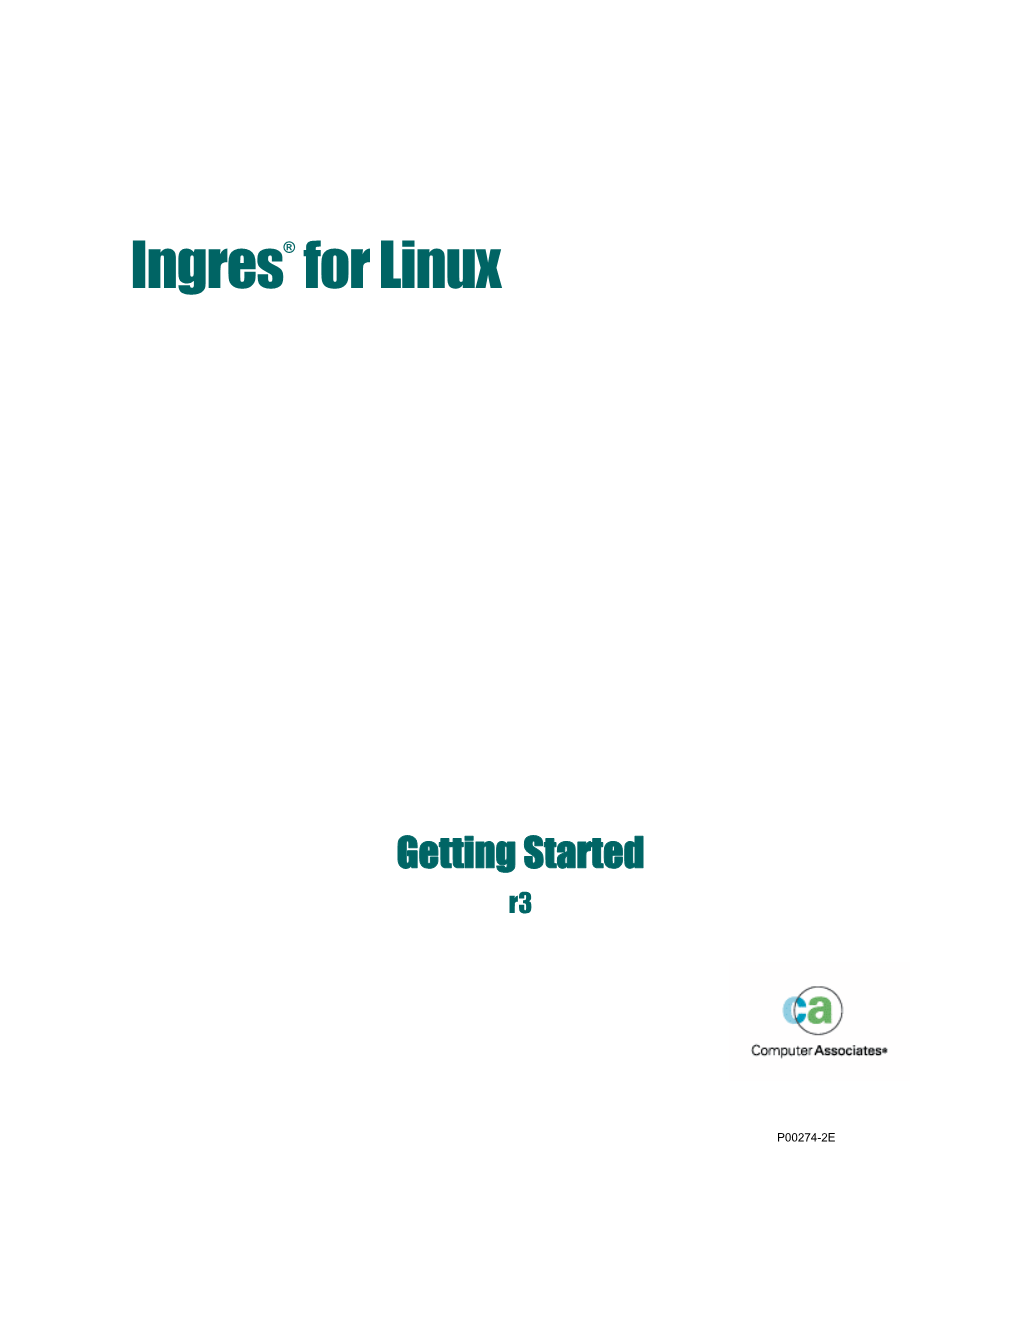 Ingres R3 for Linux Getting Started